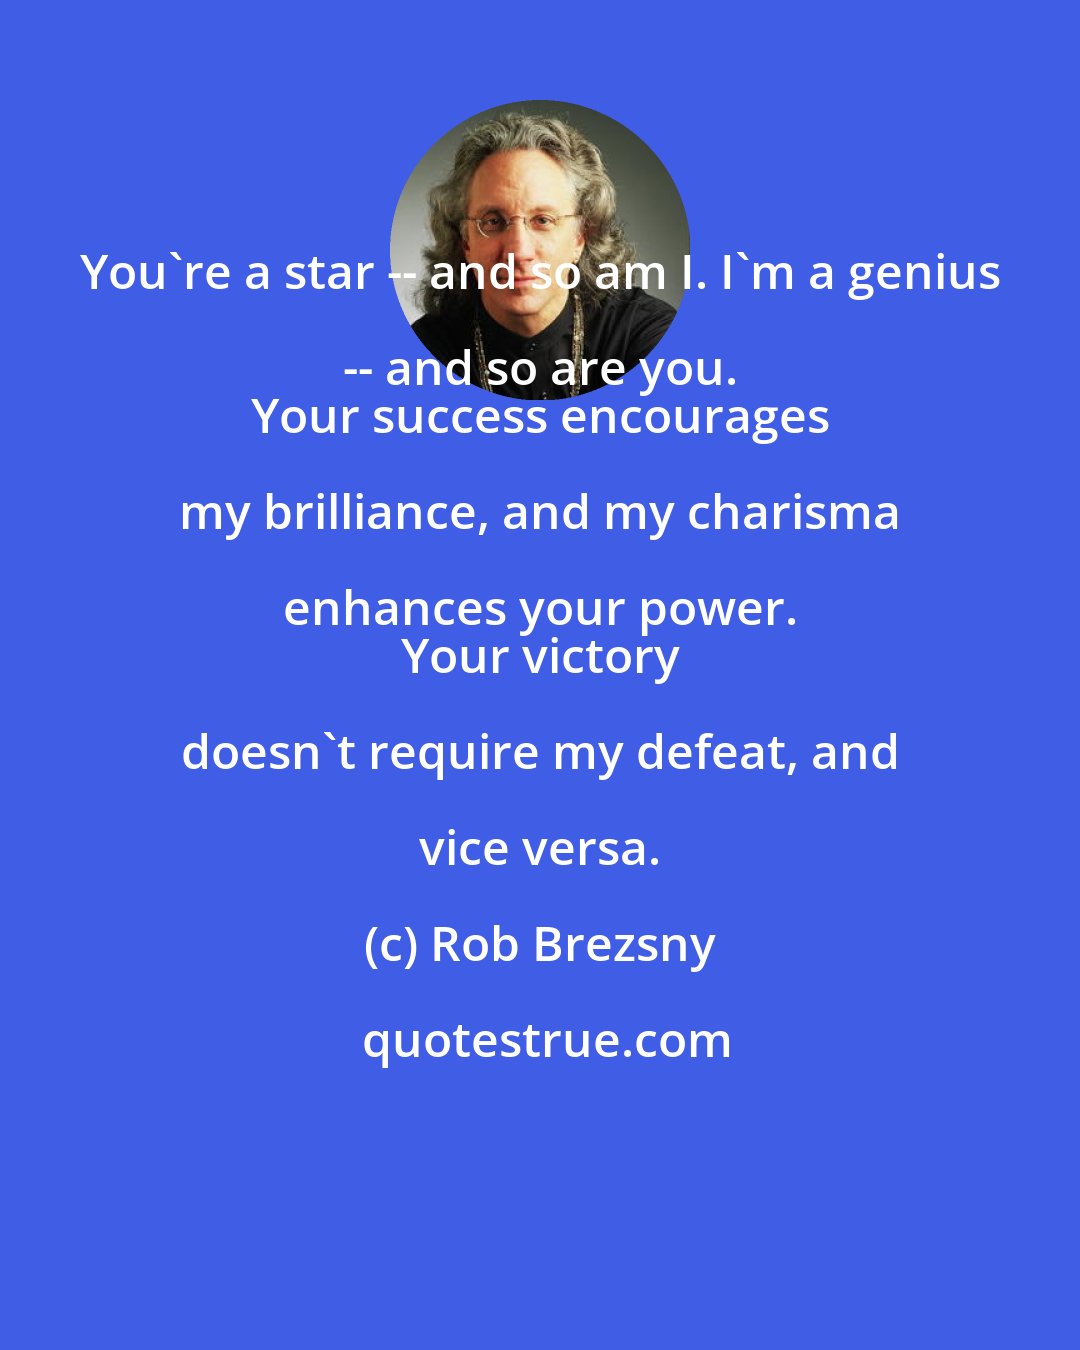 Rob Brezsny: You're a star -- and so am I. I'm a genius -- and so are you. 
 Your success encourages my brilliance, and my charisma enhances your power. 
 Your victory doesn't require my defeat, and vice versa.